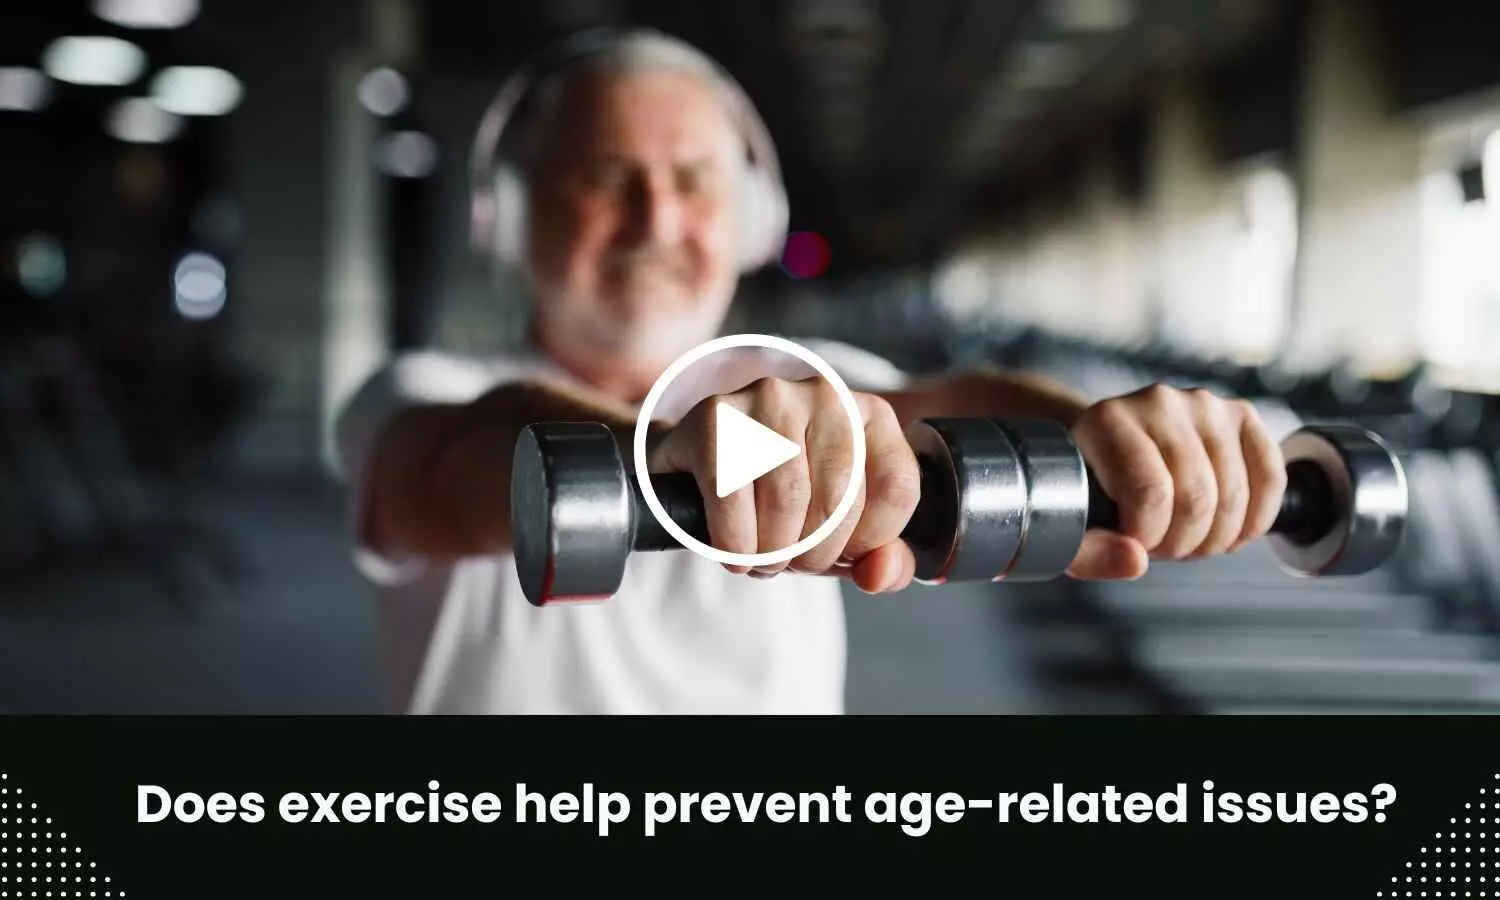 Does exercise help prevent age-related issues?